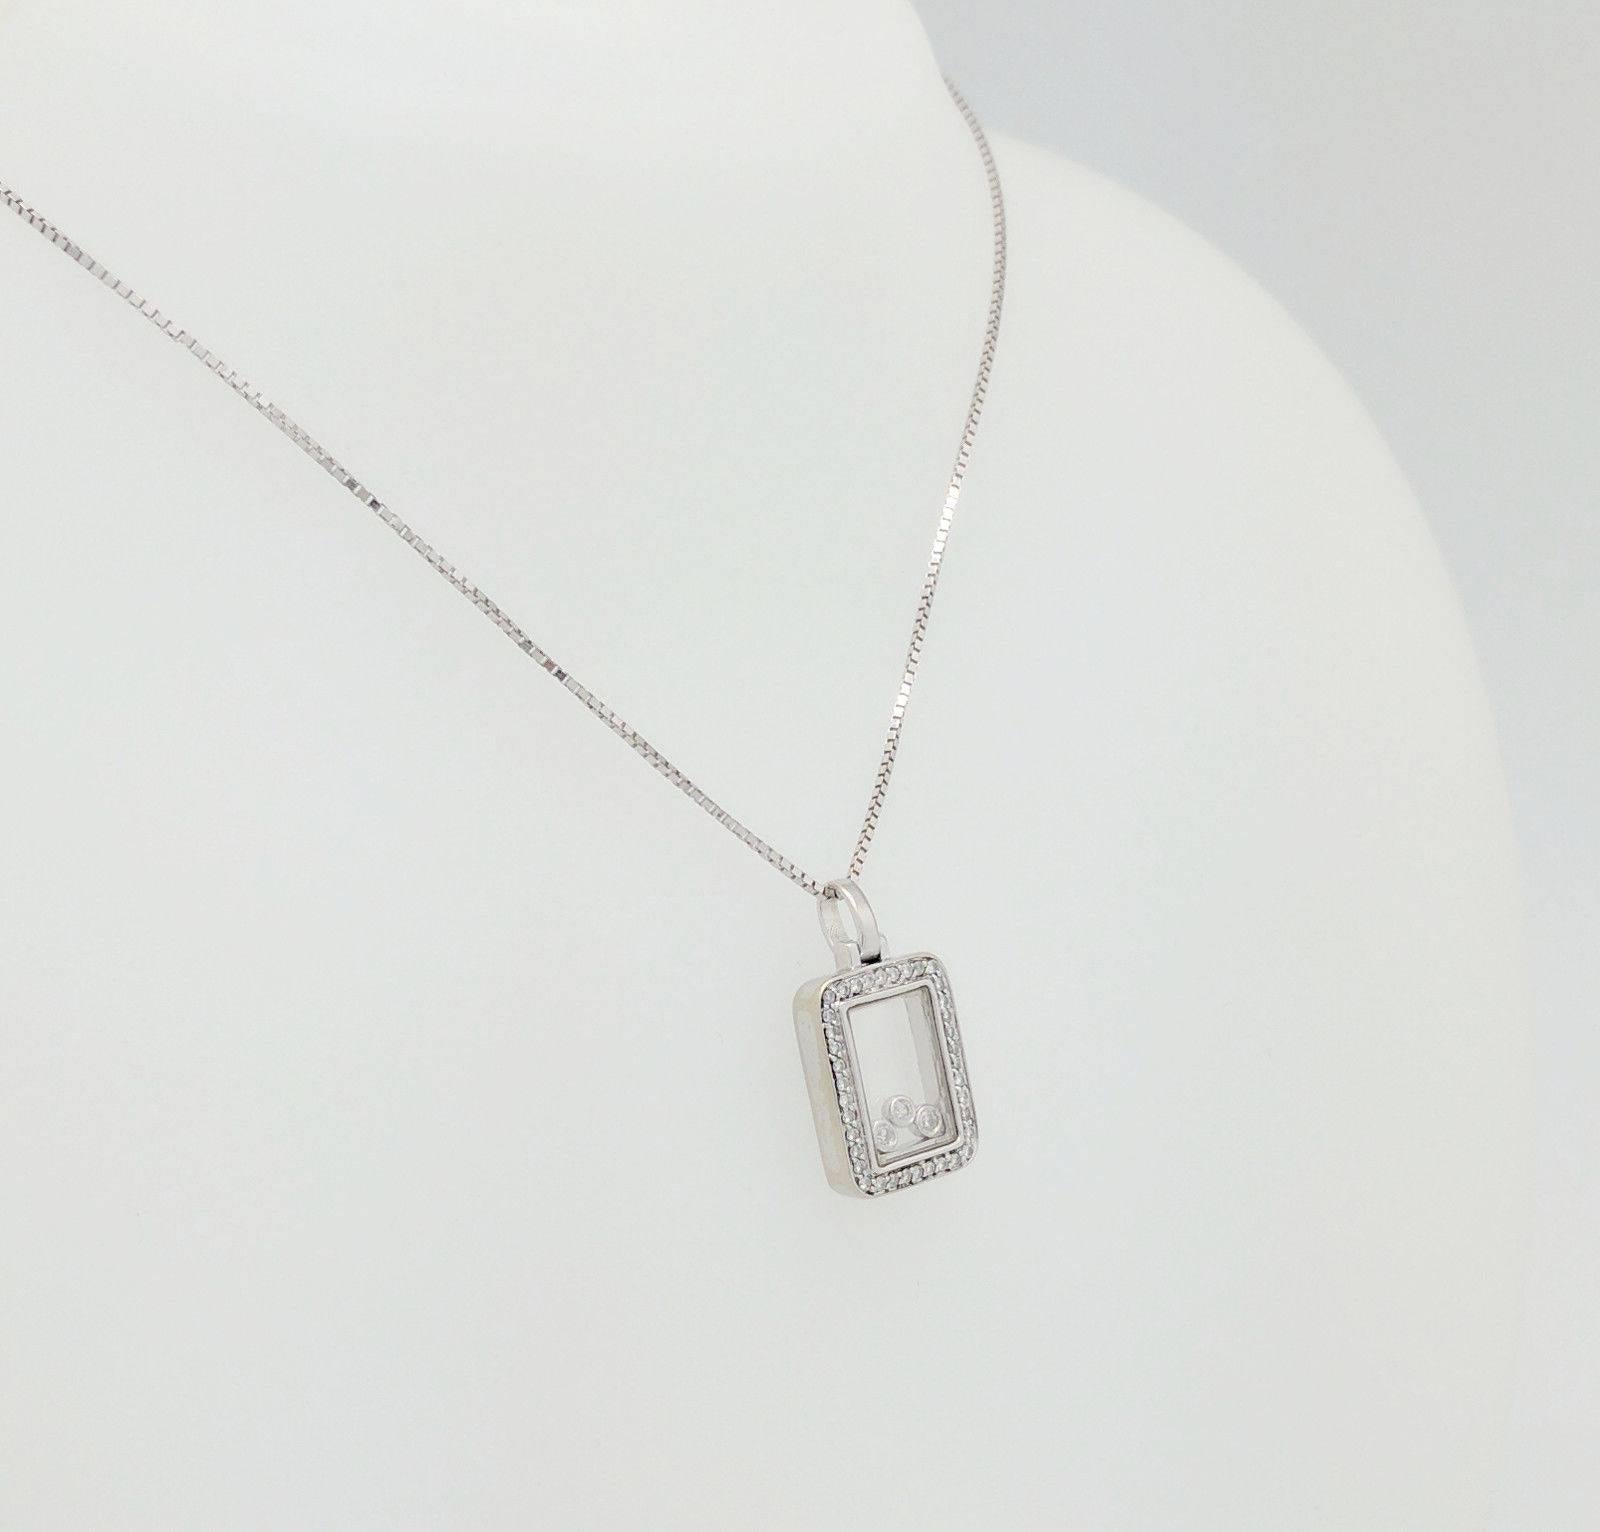 14 Karat White Gold Floating Diamond Rectangle Pendant Necklace In Excellent Condition For Sale In Gainesville, FL